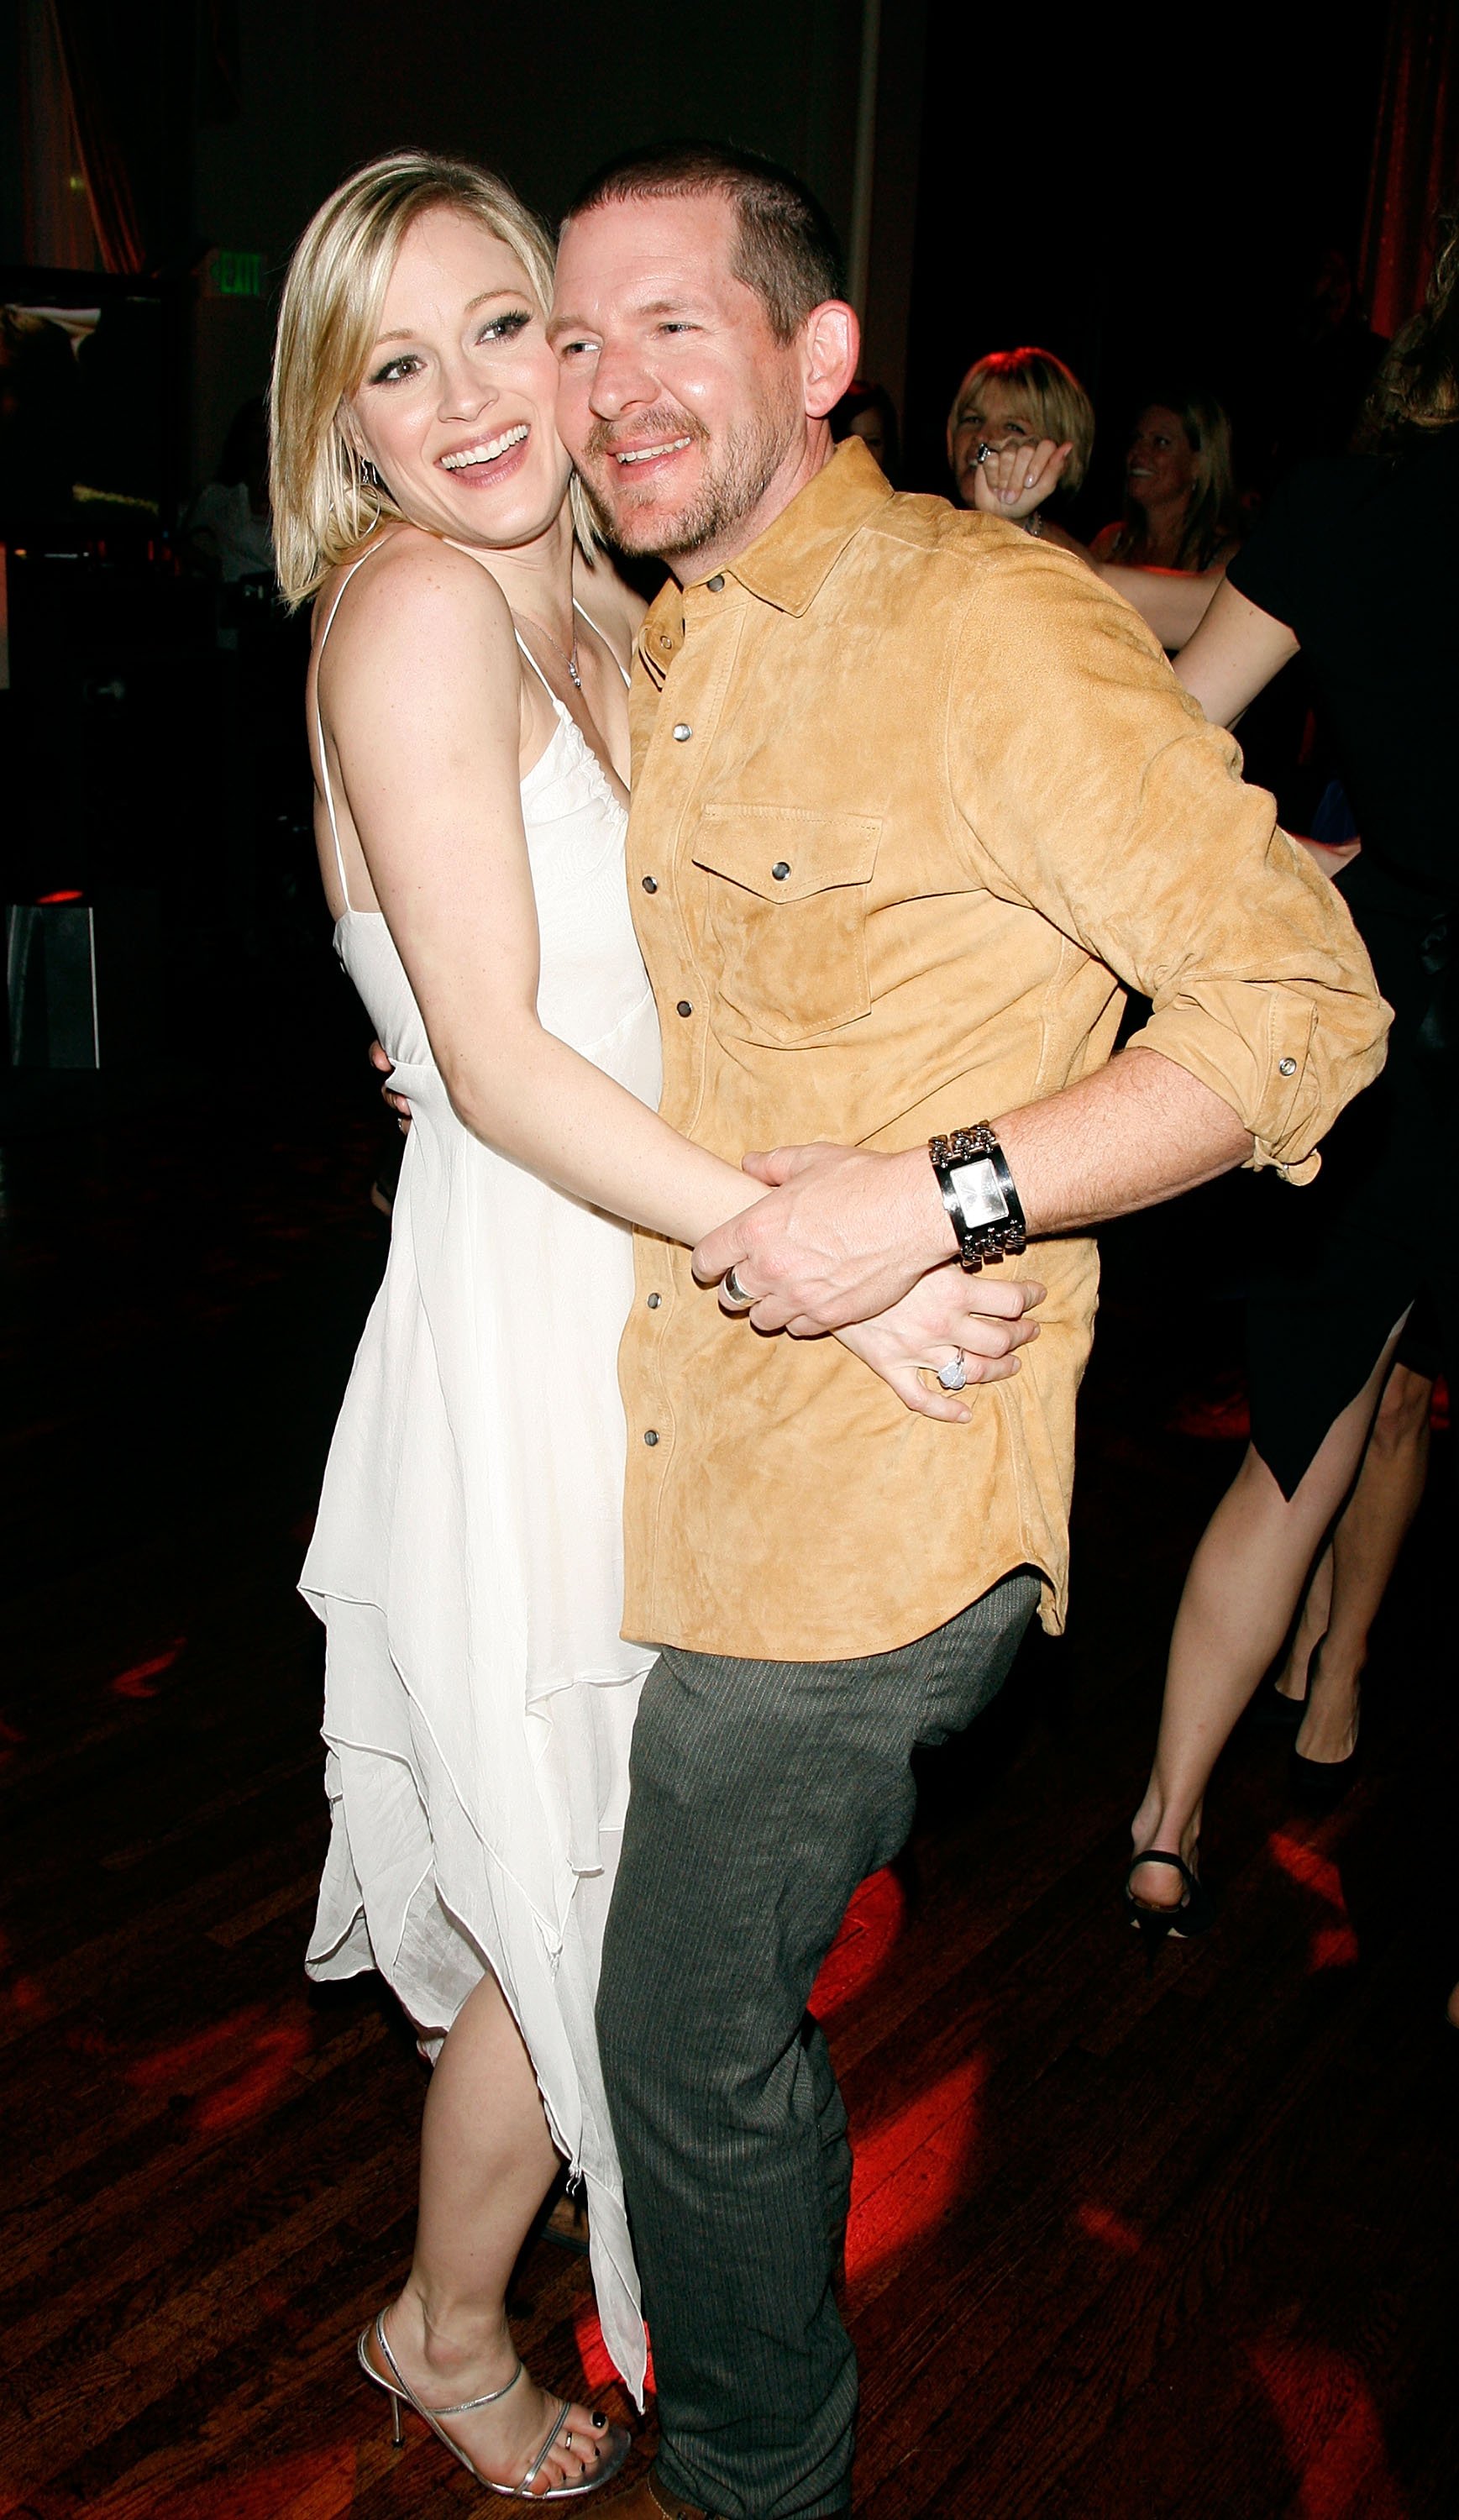 Teri Polo and musician Jamie Wollam attend the after party reception of FOX's "The Wedding Bells" held at The Wilshire Ebell Theatre on March 9, 2007, in Los Angeles, California. | Source: Getty Images.